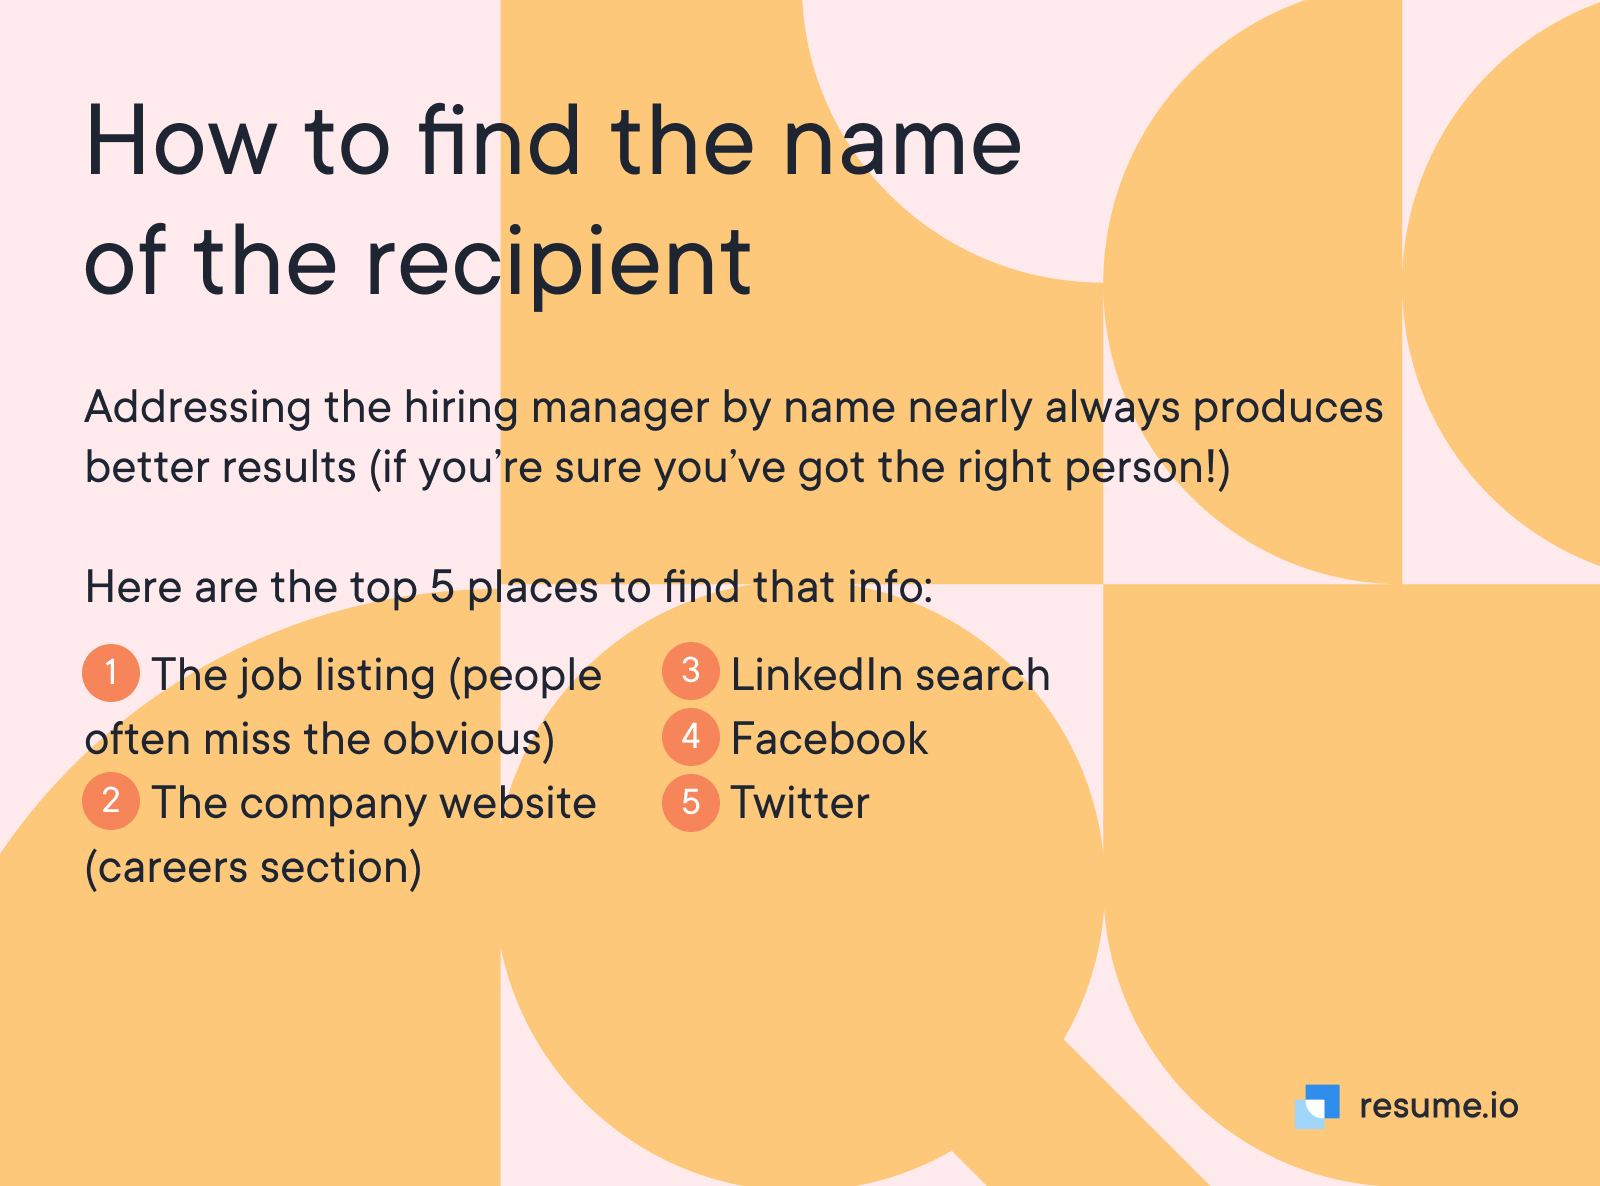 How to find the name of the recipient